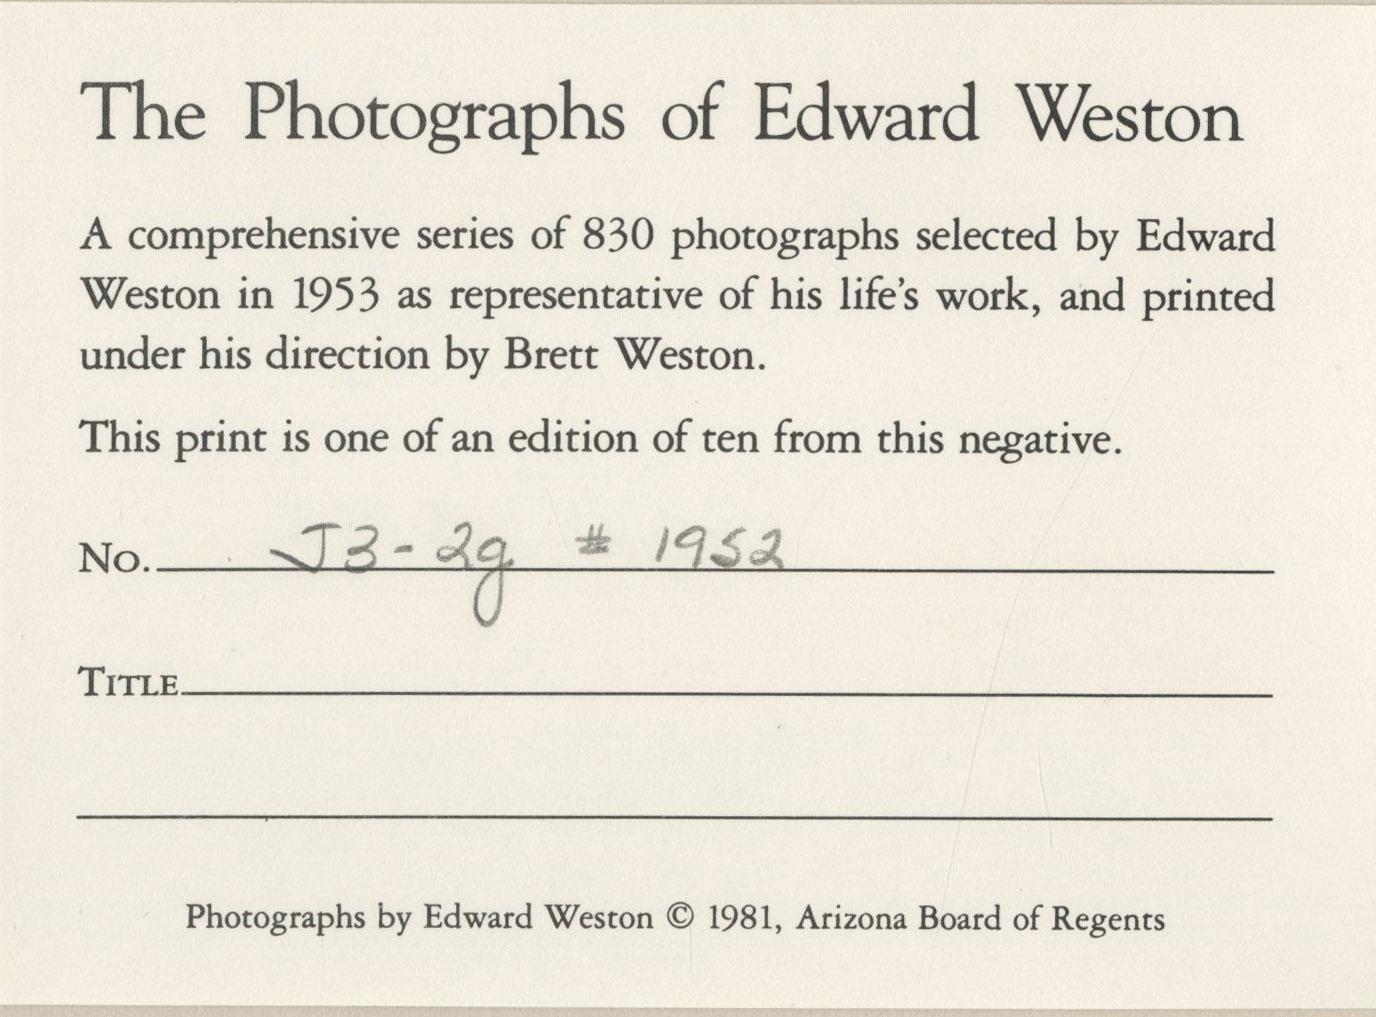 Juniper, Lake Tenaya
Gelatin silver print, 1937
Unsigned
Edward Weston Estate stamp verso (see photo)
A lifetime printing by Brett Weston, supervised by his father Edward, printed in 1953
Edition of 5 or 6 examples
Weston negative Numbered in pencil